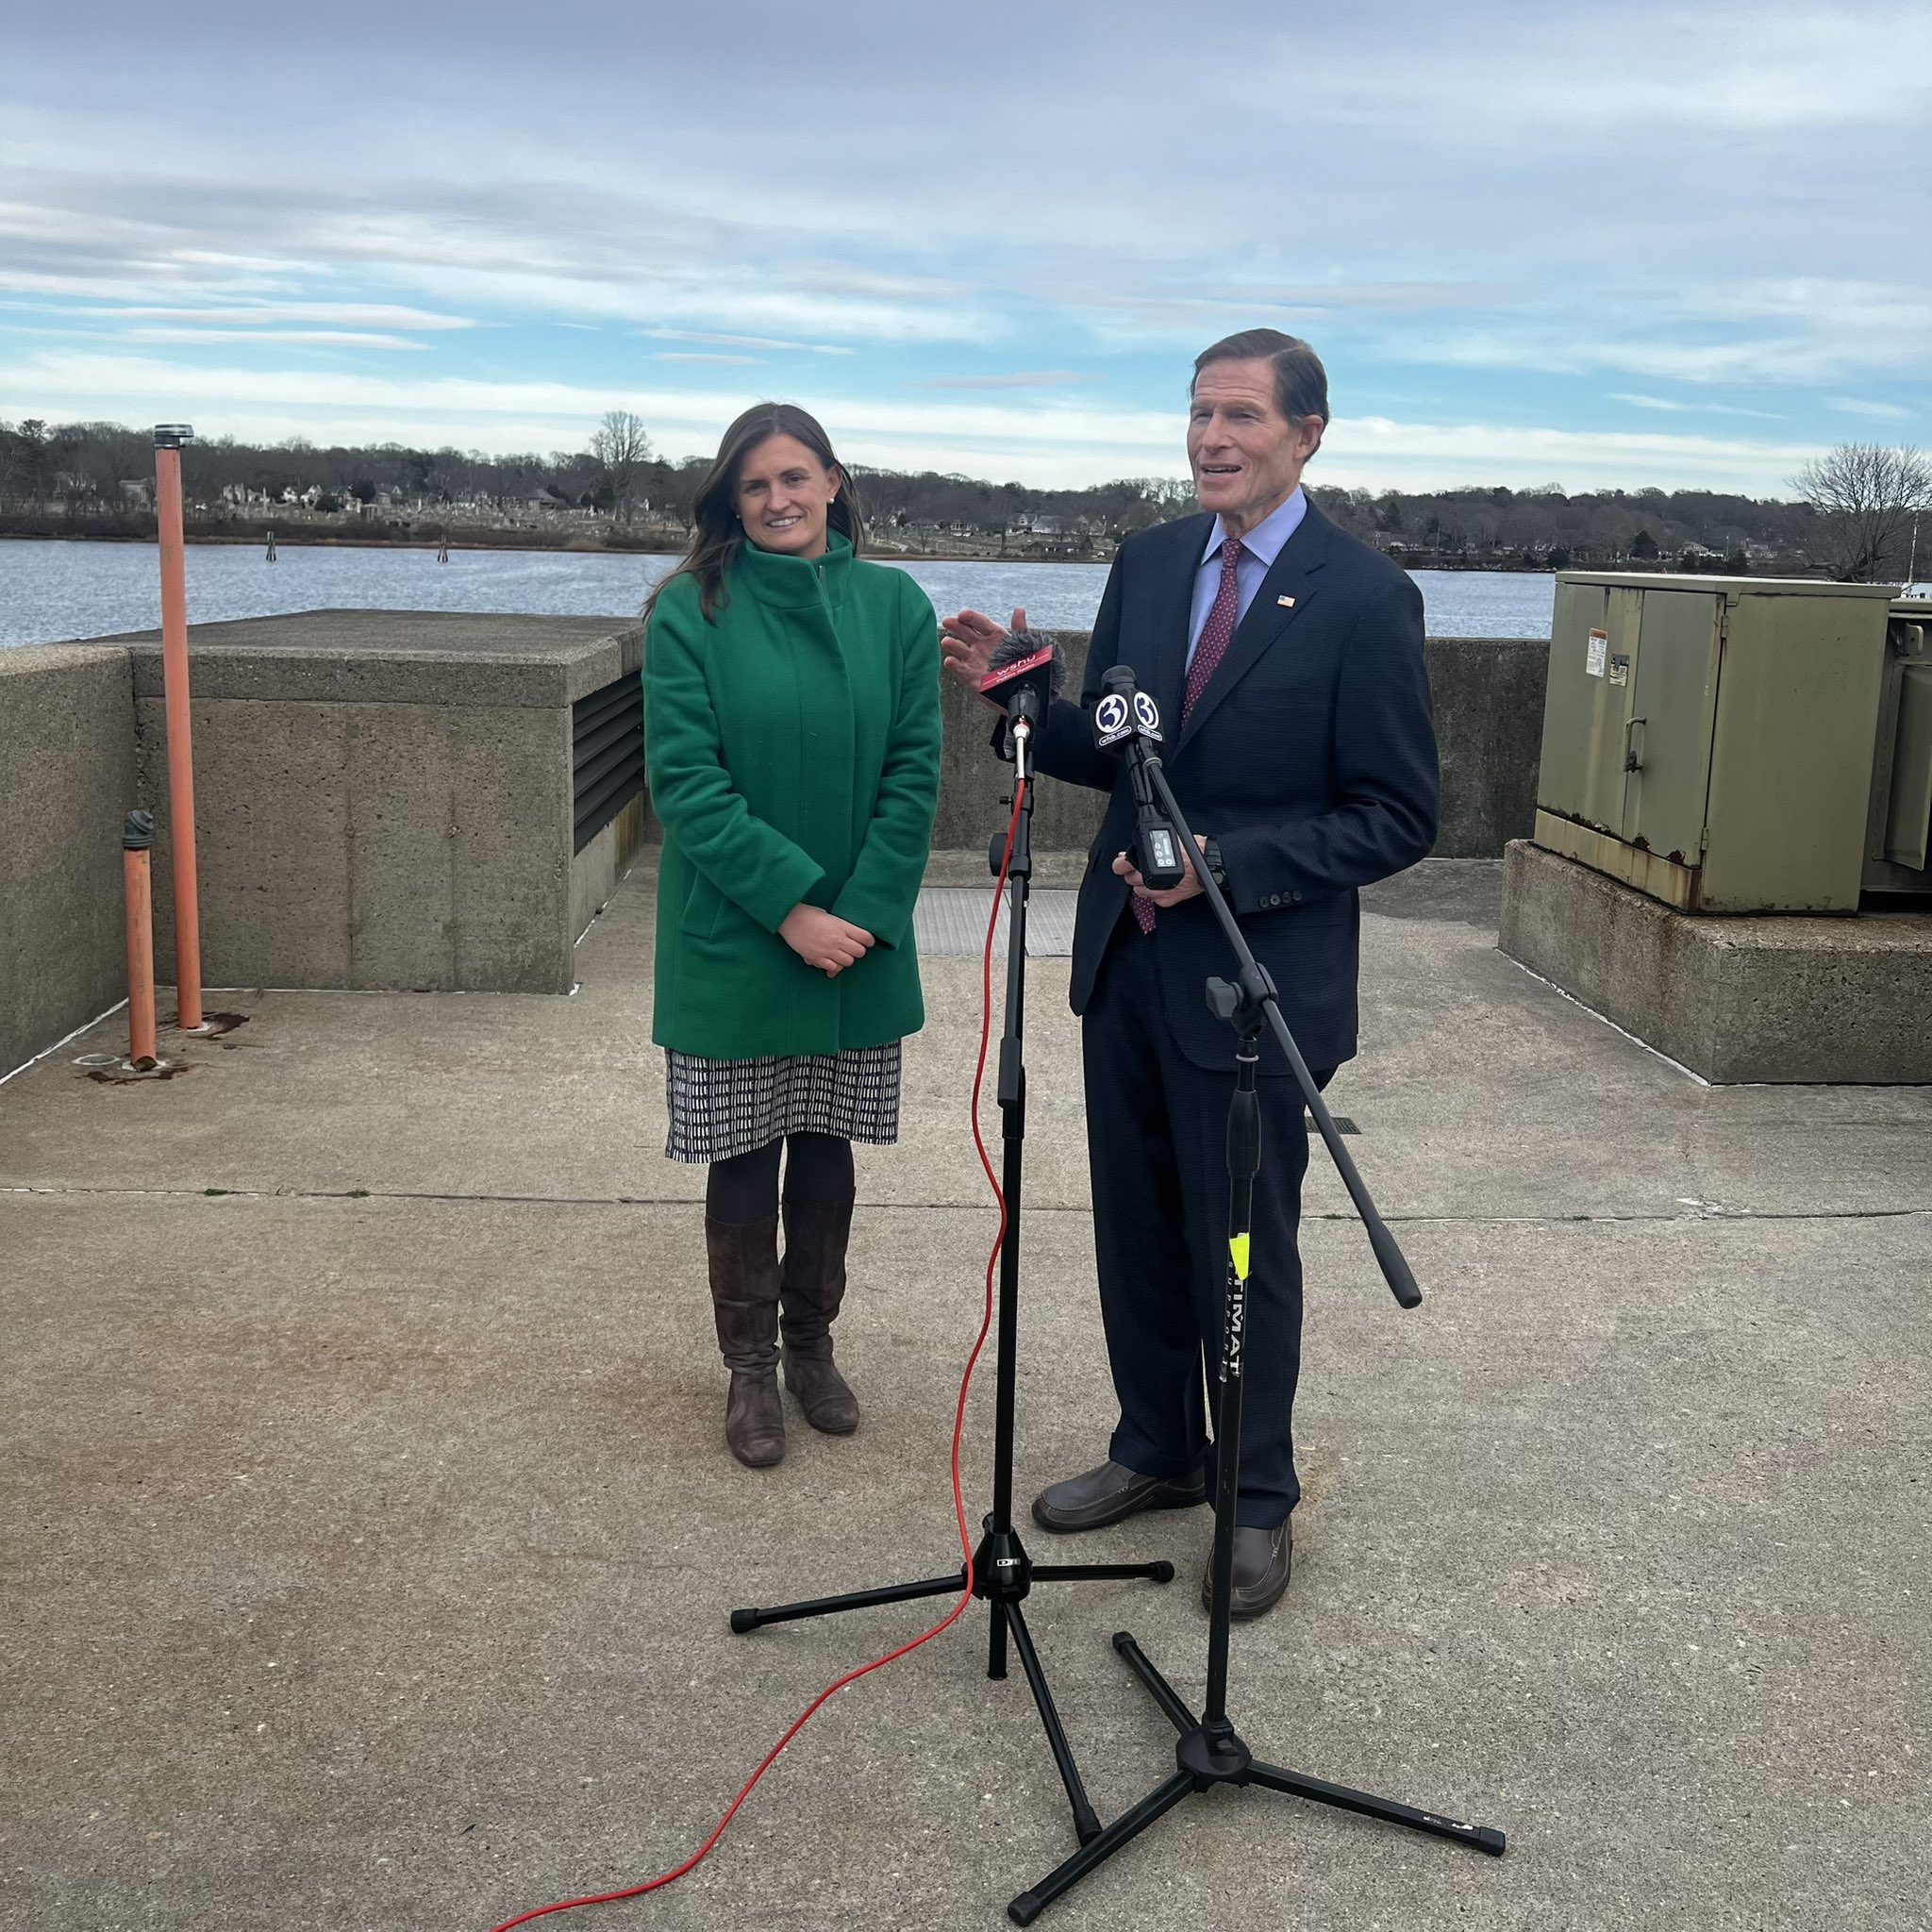 Blumenthal also announced $720,000 in federal funding to repair two sewage pumps at the River Road pump station, located on the banks of the Pawcatuck River.